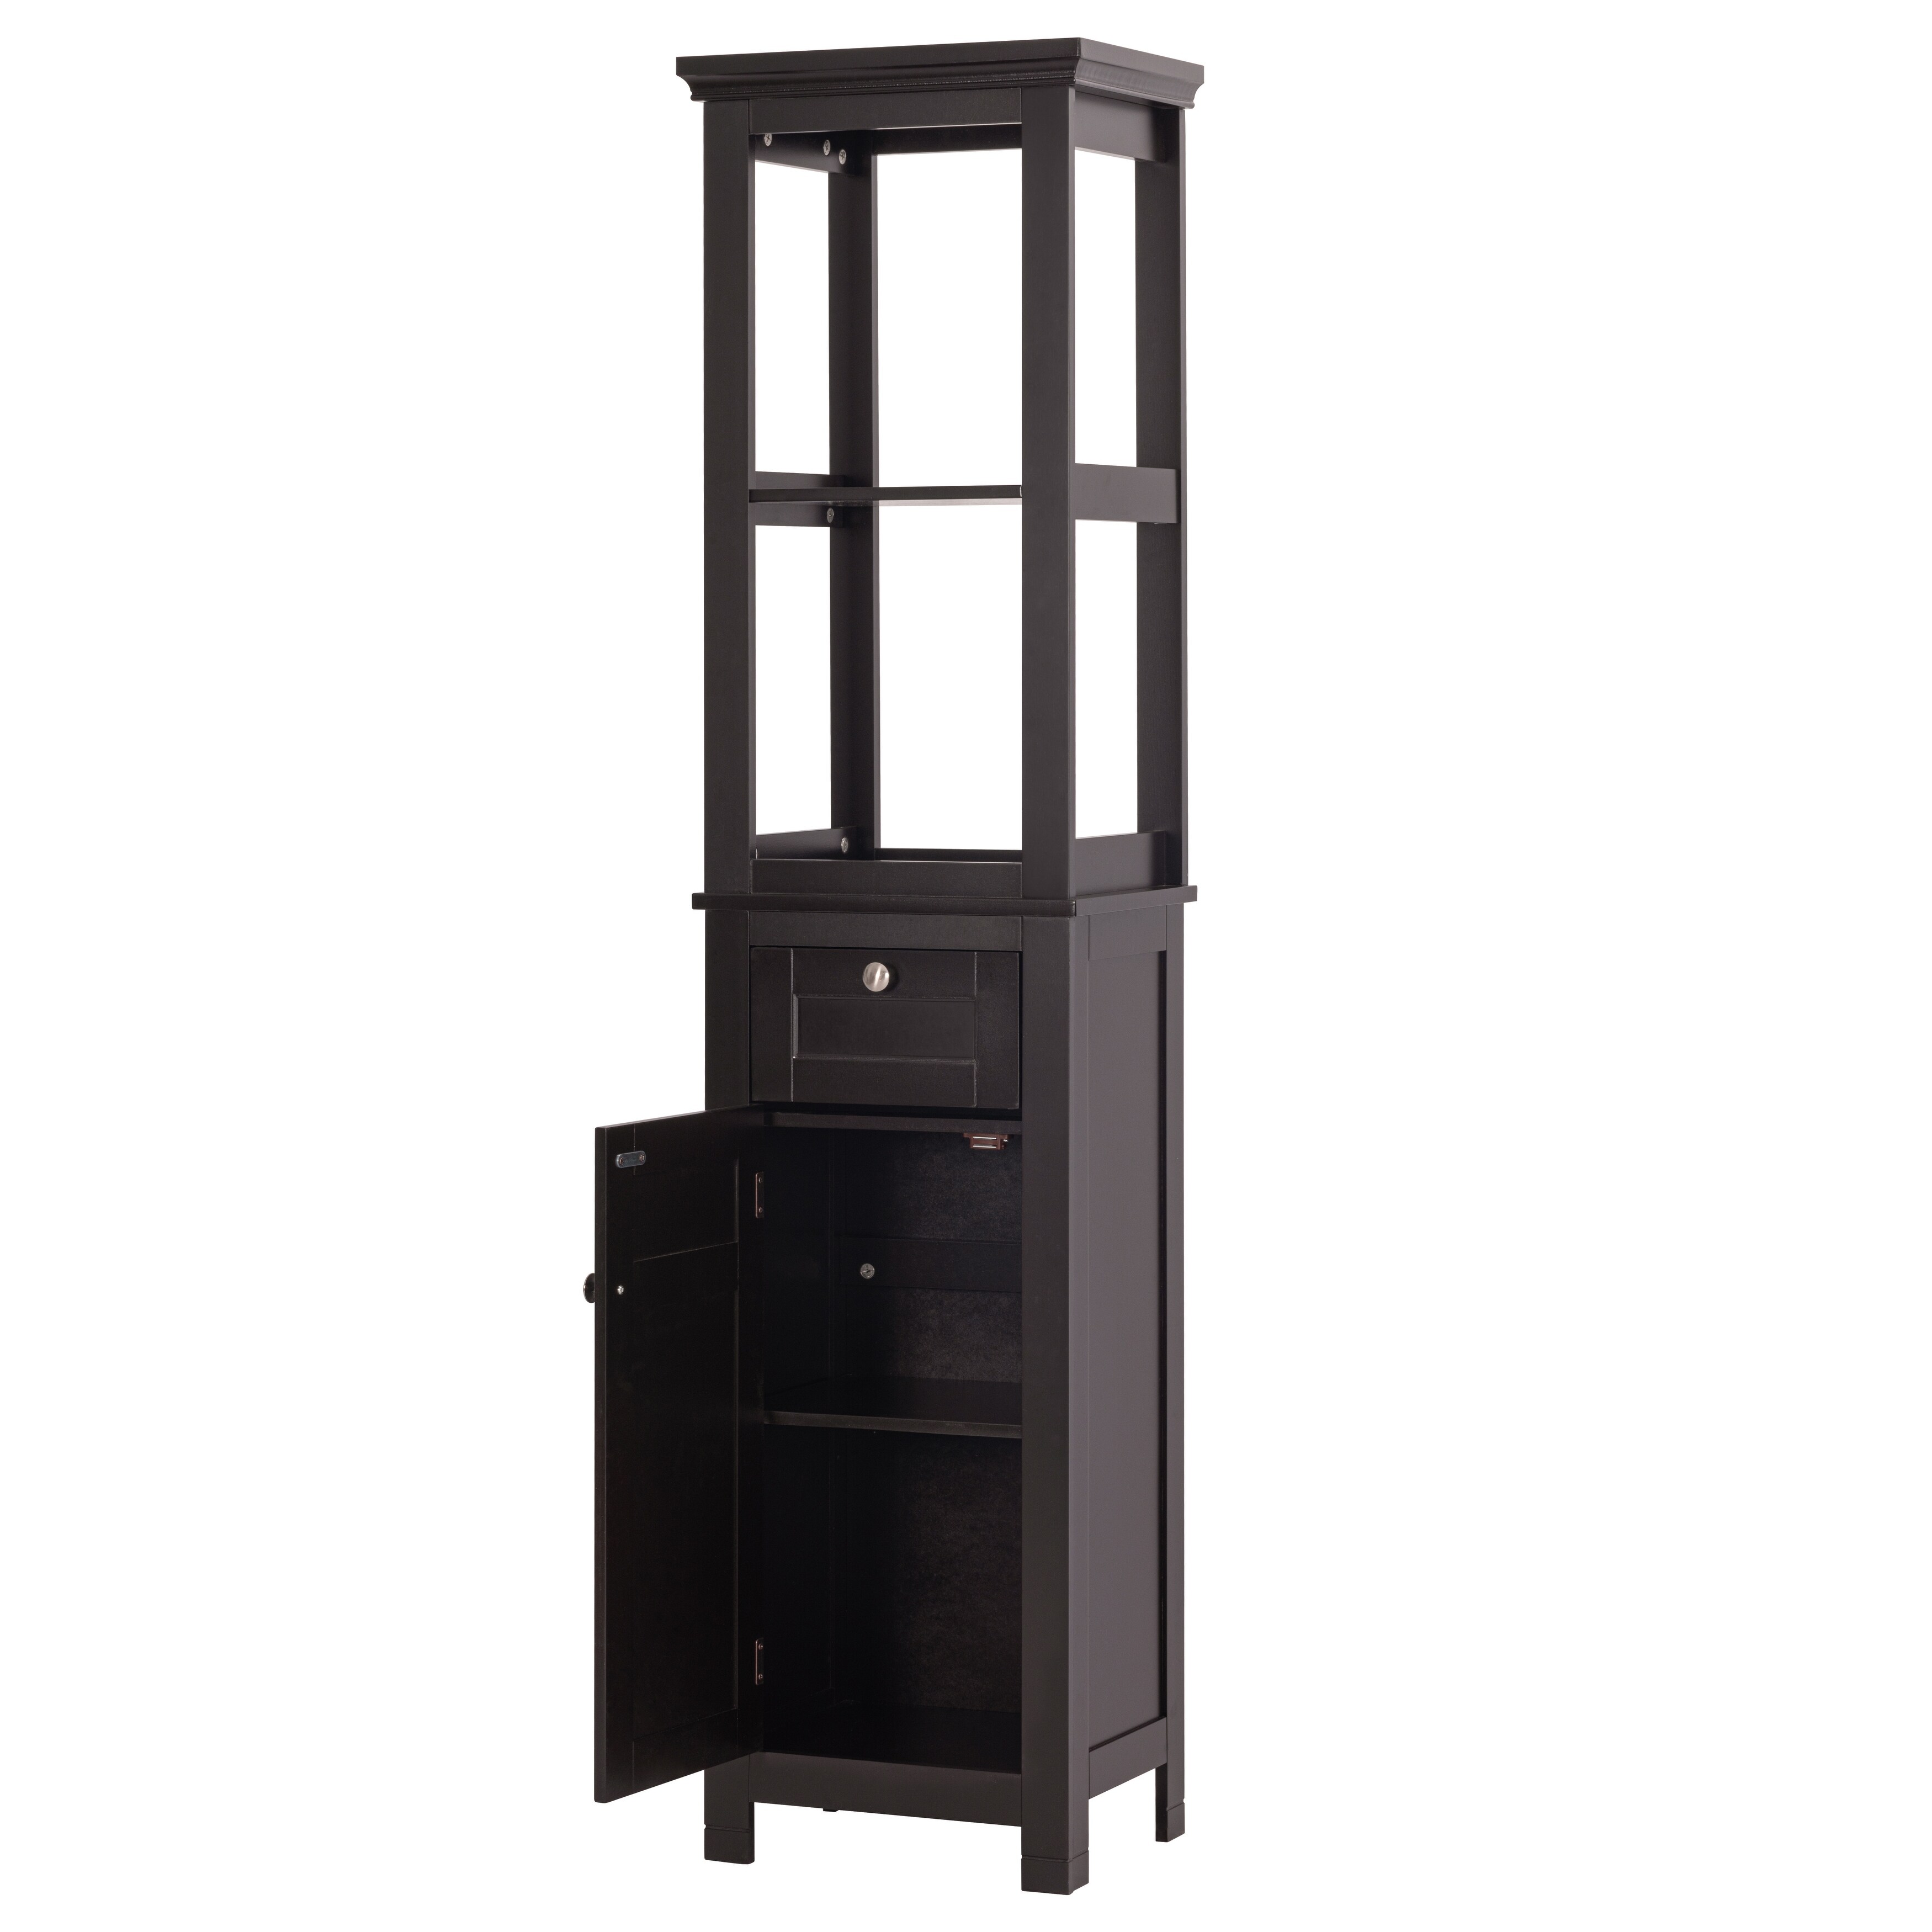 https://ak1.ostkcdn.com/images/products/is/images/direct/9c298c6480392fc90329cf318f37bba31ab805e2/Spirich-Home-Bathroom-Freestanding-Storage-Cabinet-with-Two-Tier-Open-Shelves%2C-Tall-Slim-Tower-with-Door-and-Drawer%28White%29.jpg